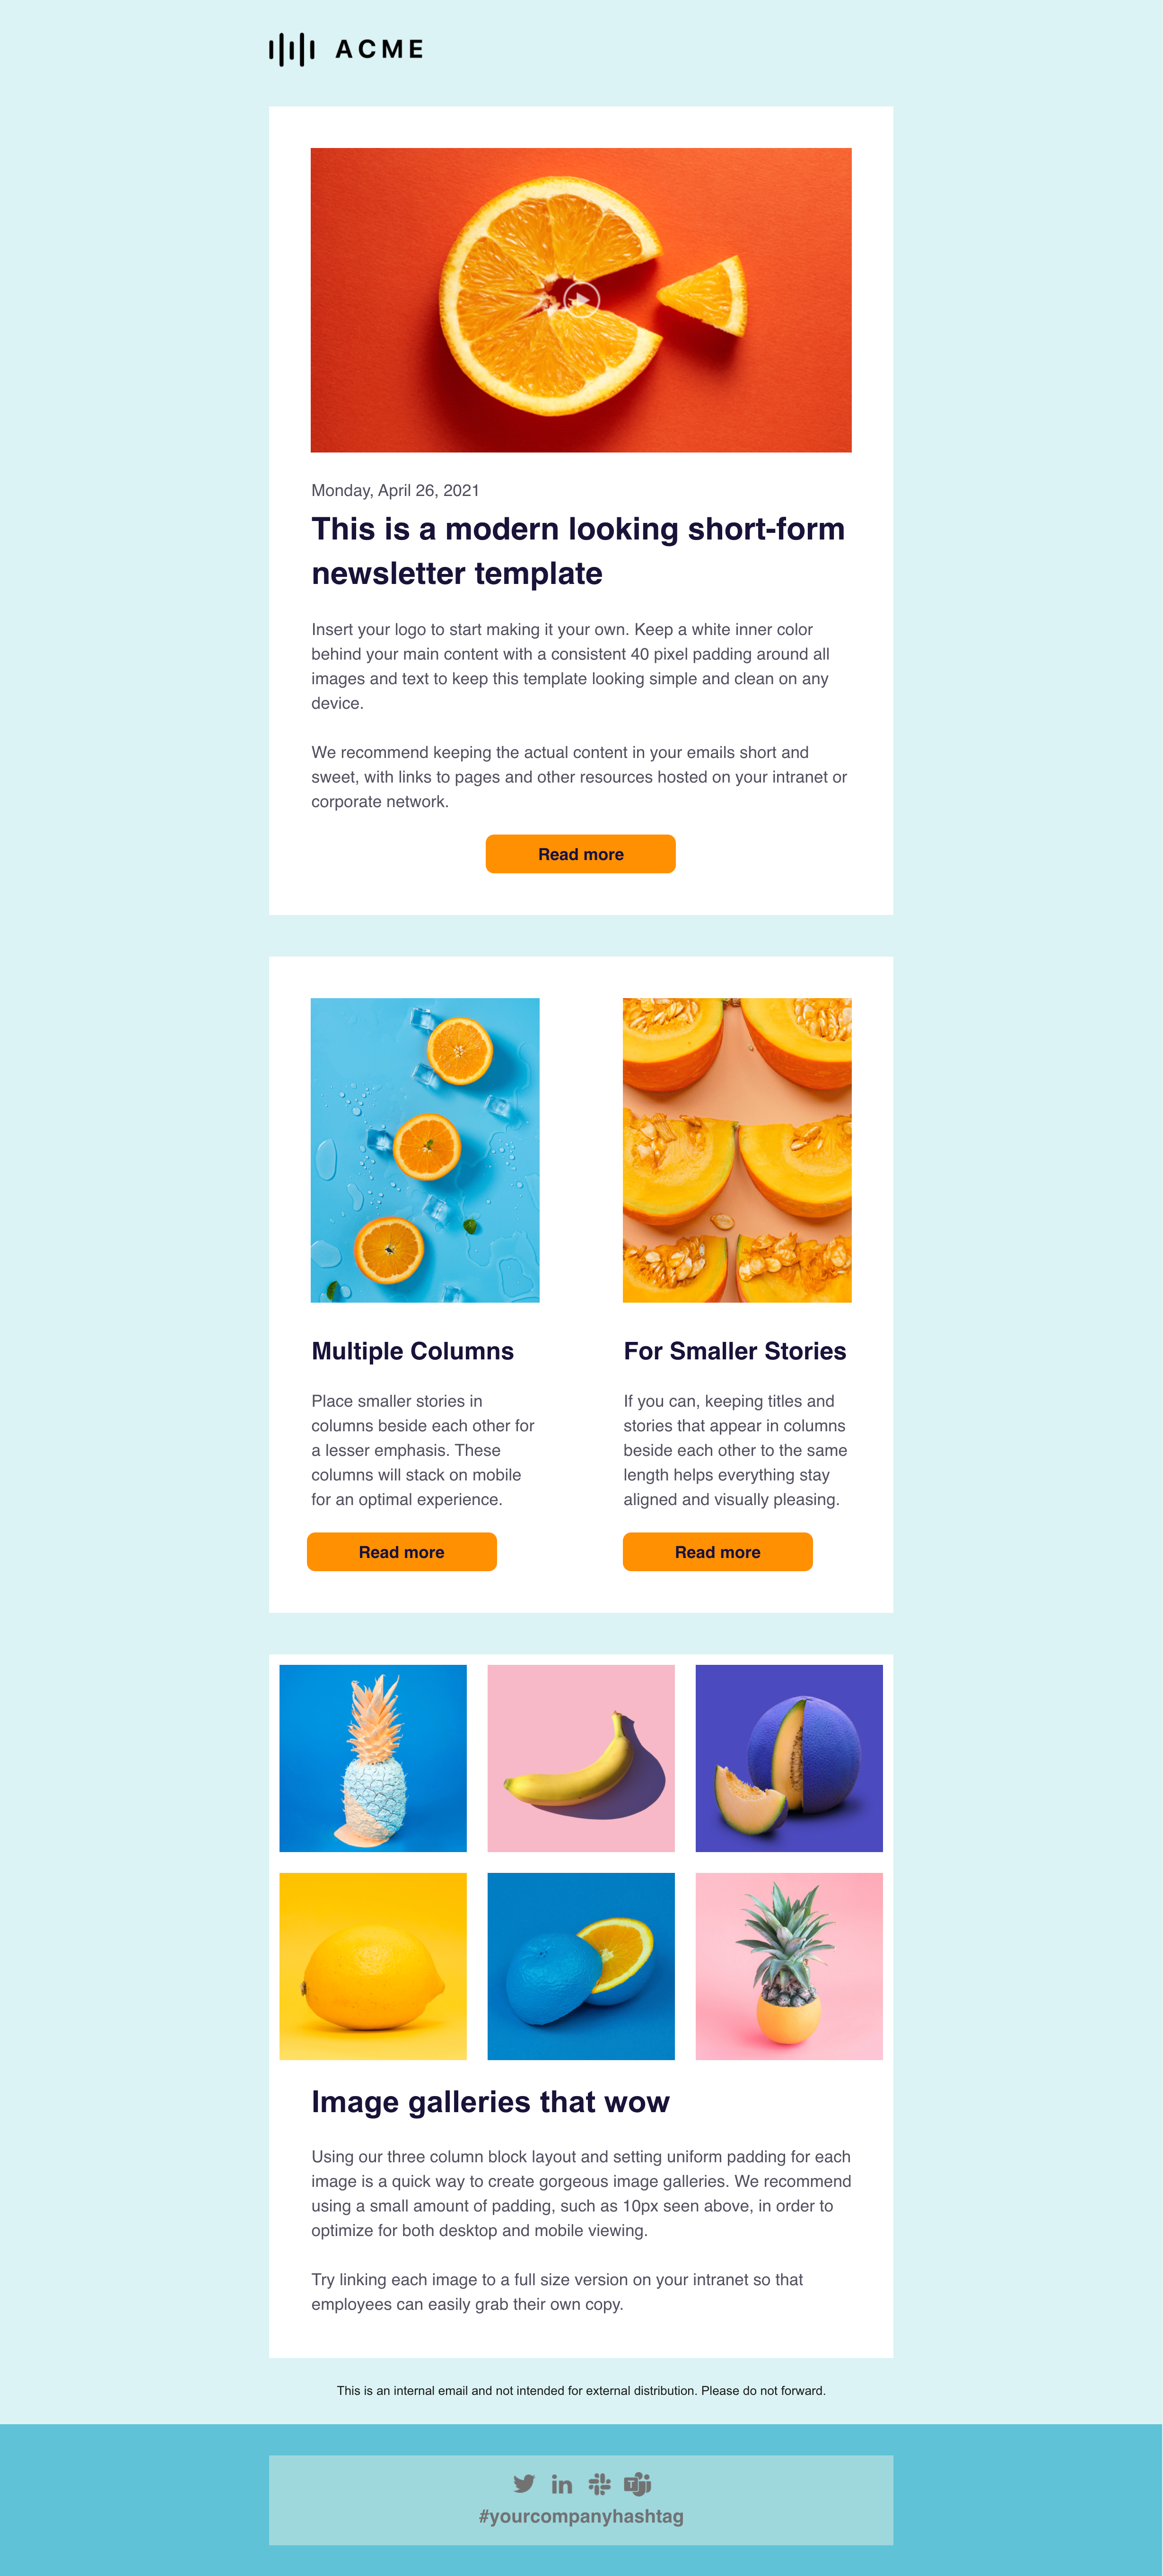 25 Brilliant Employee Newsletter Designs To Inspire You ...